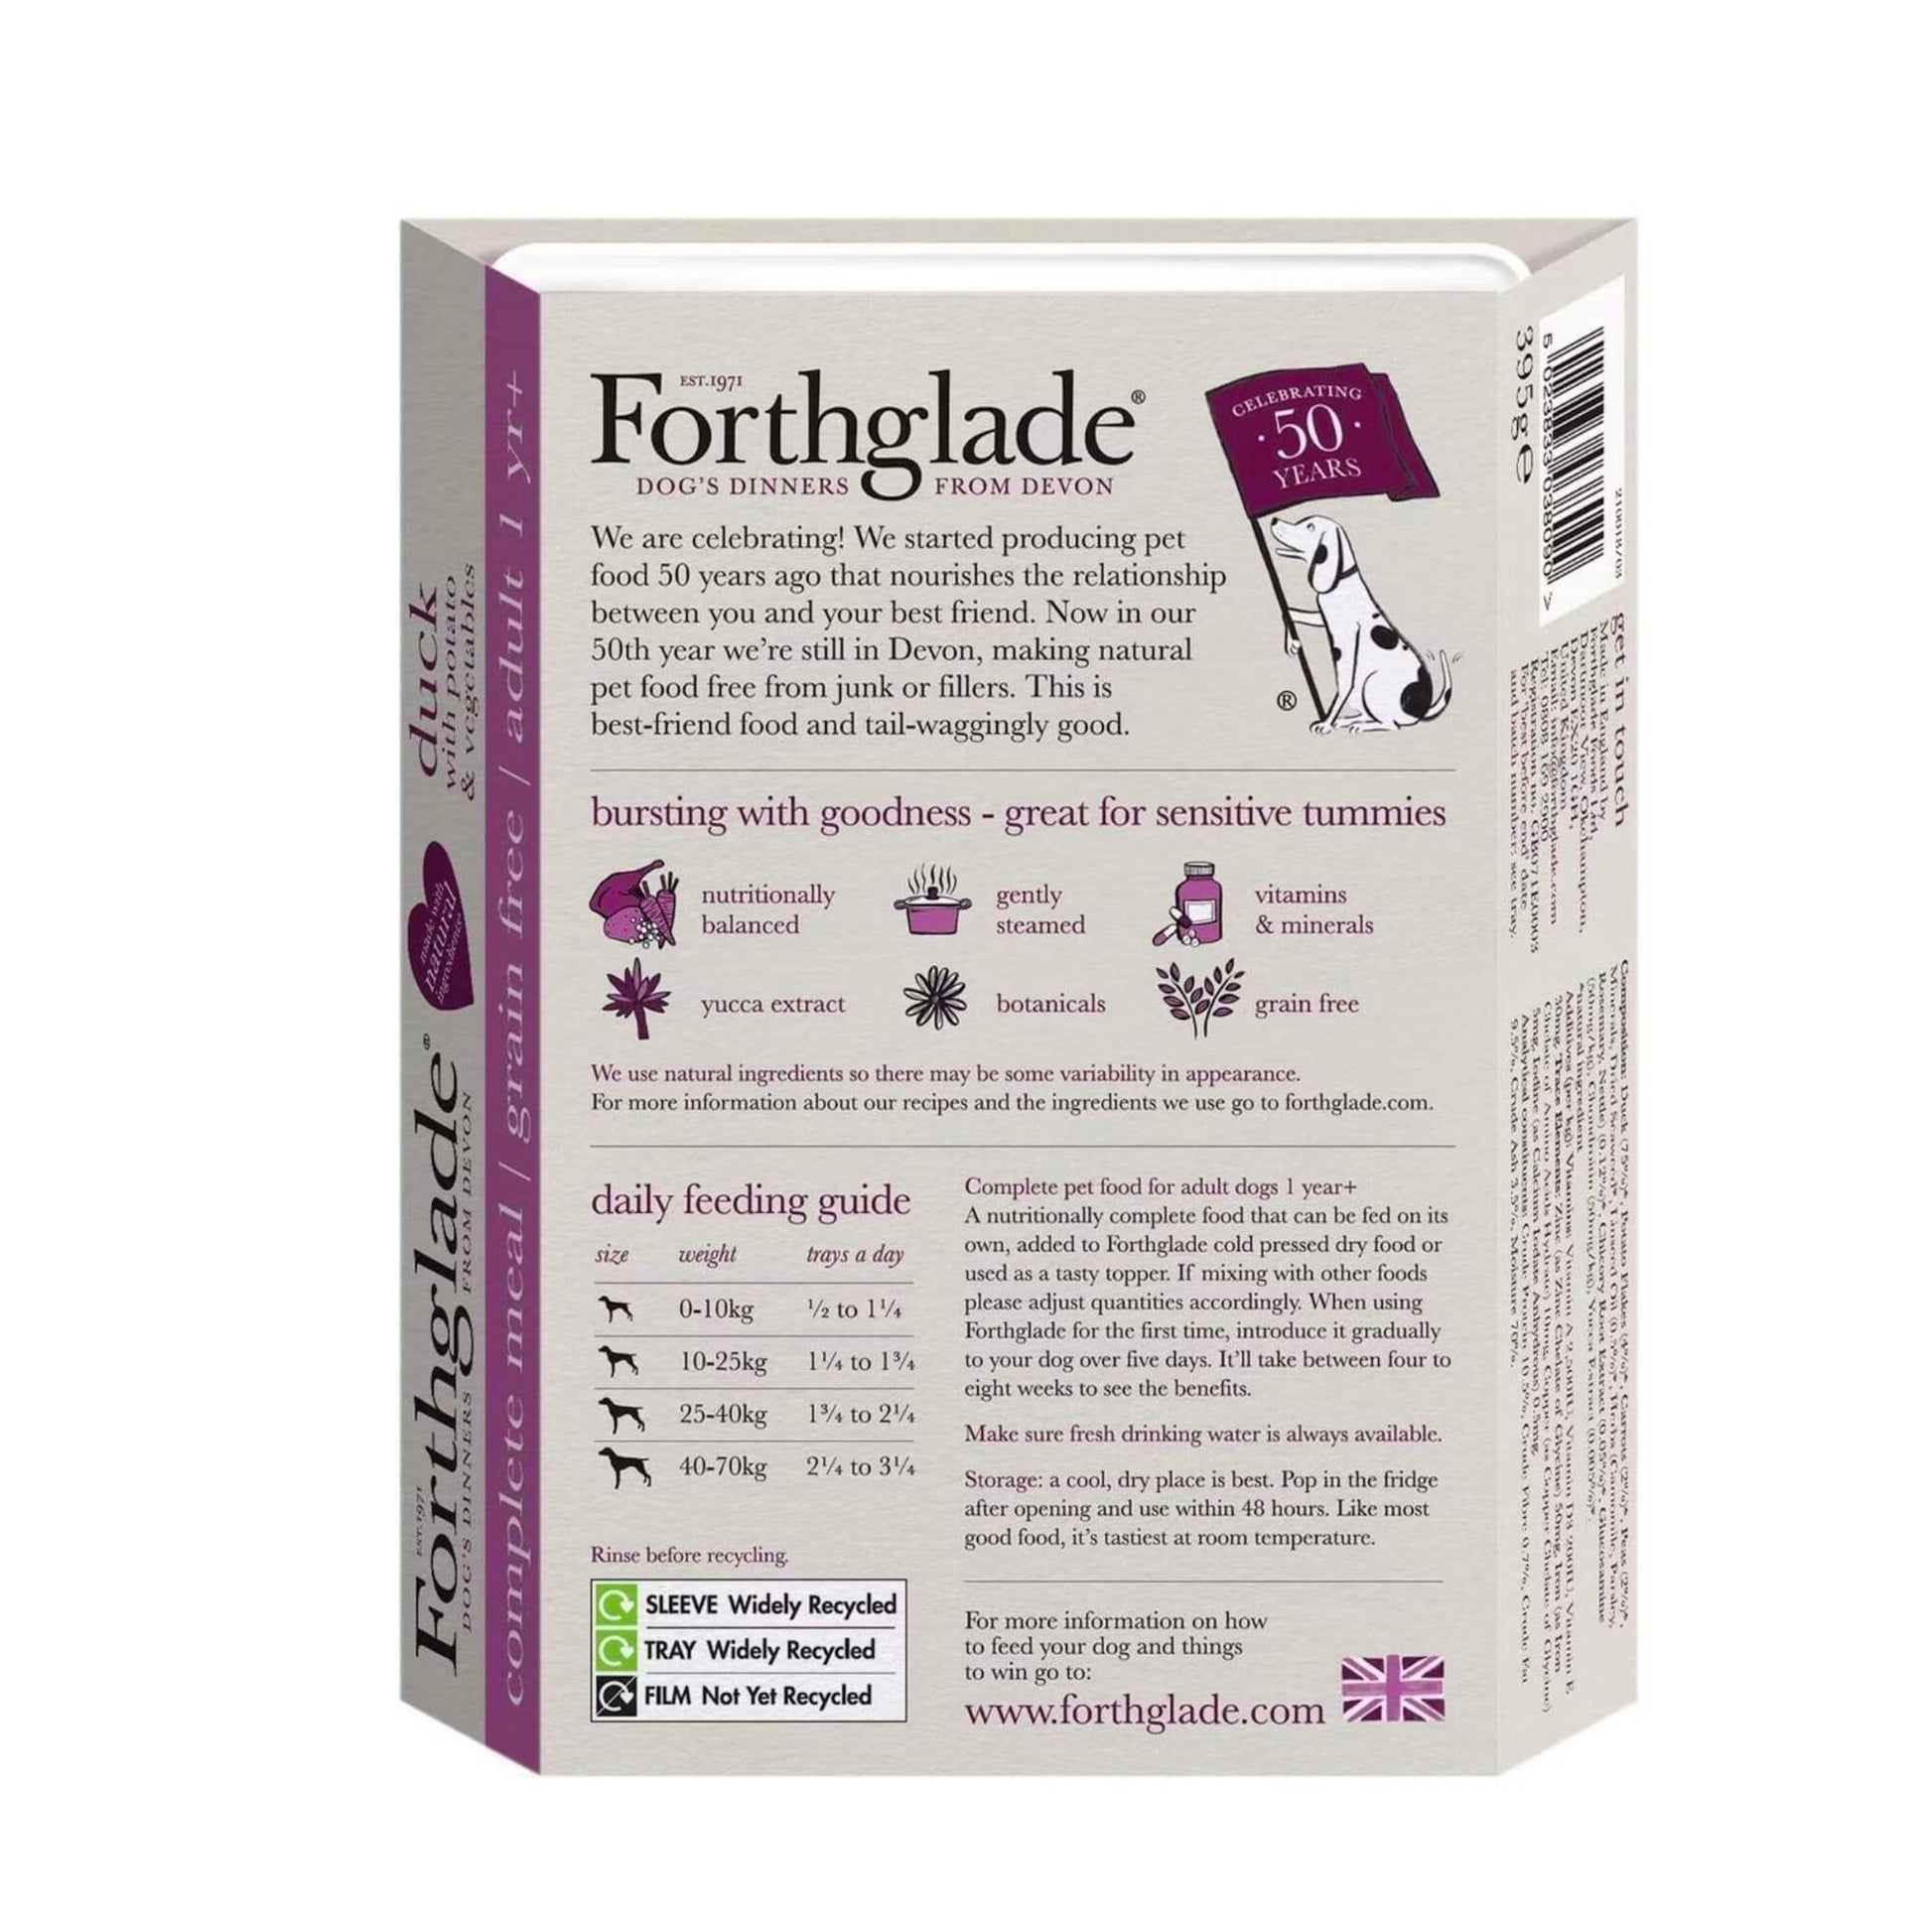 Forthglade Duck feeding guide and ingredients. 